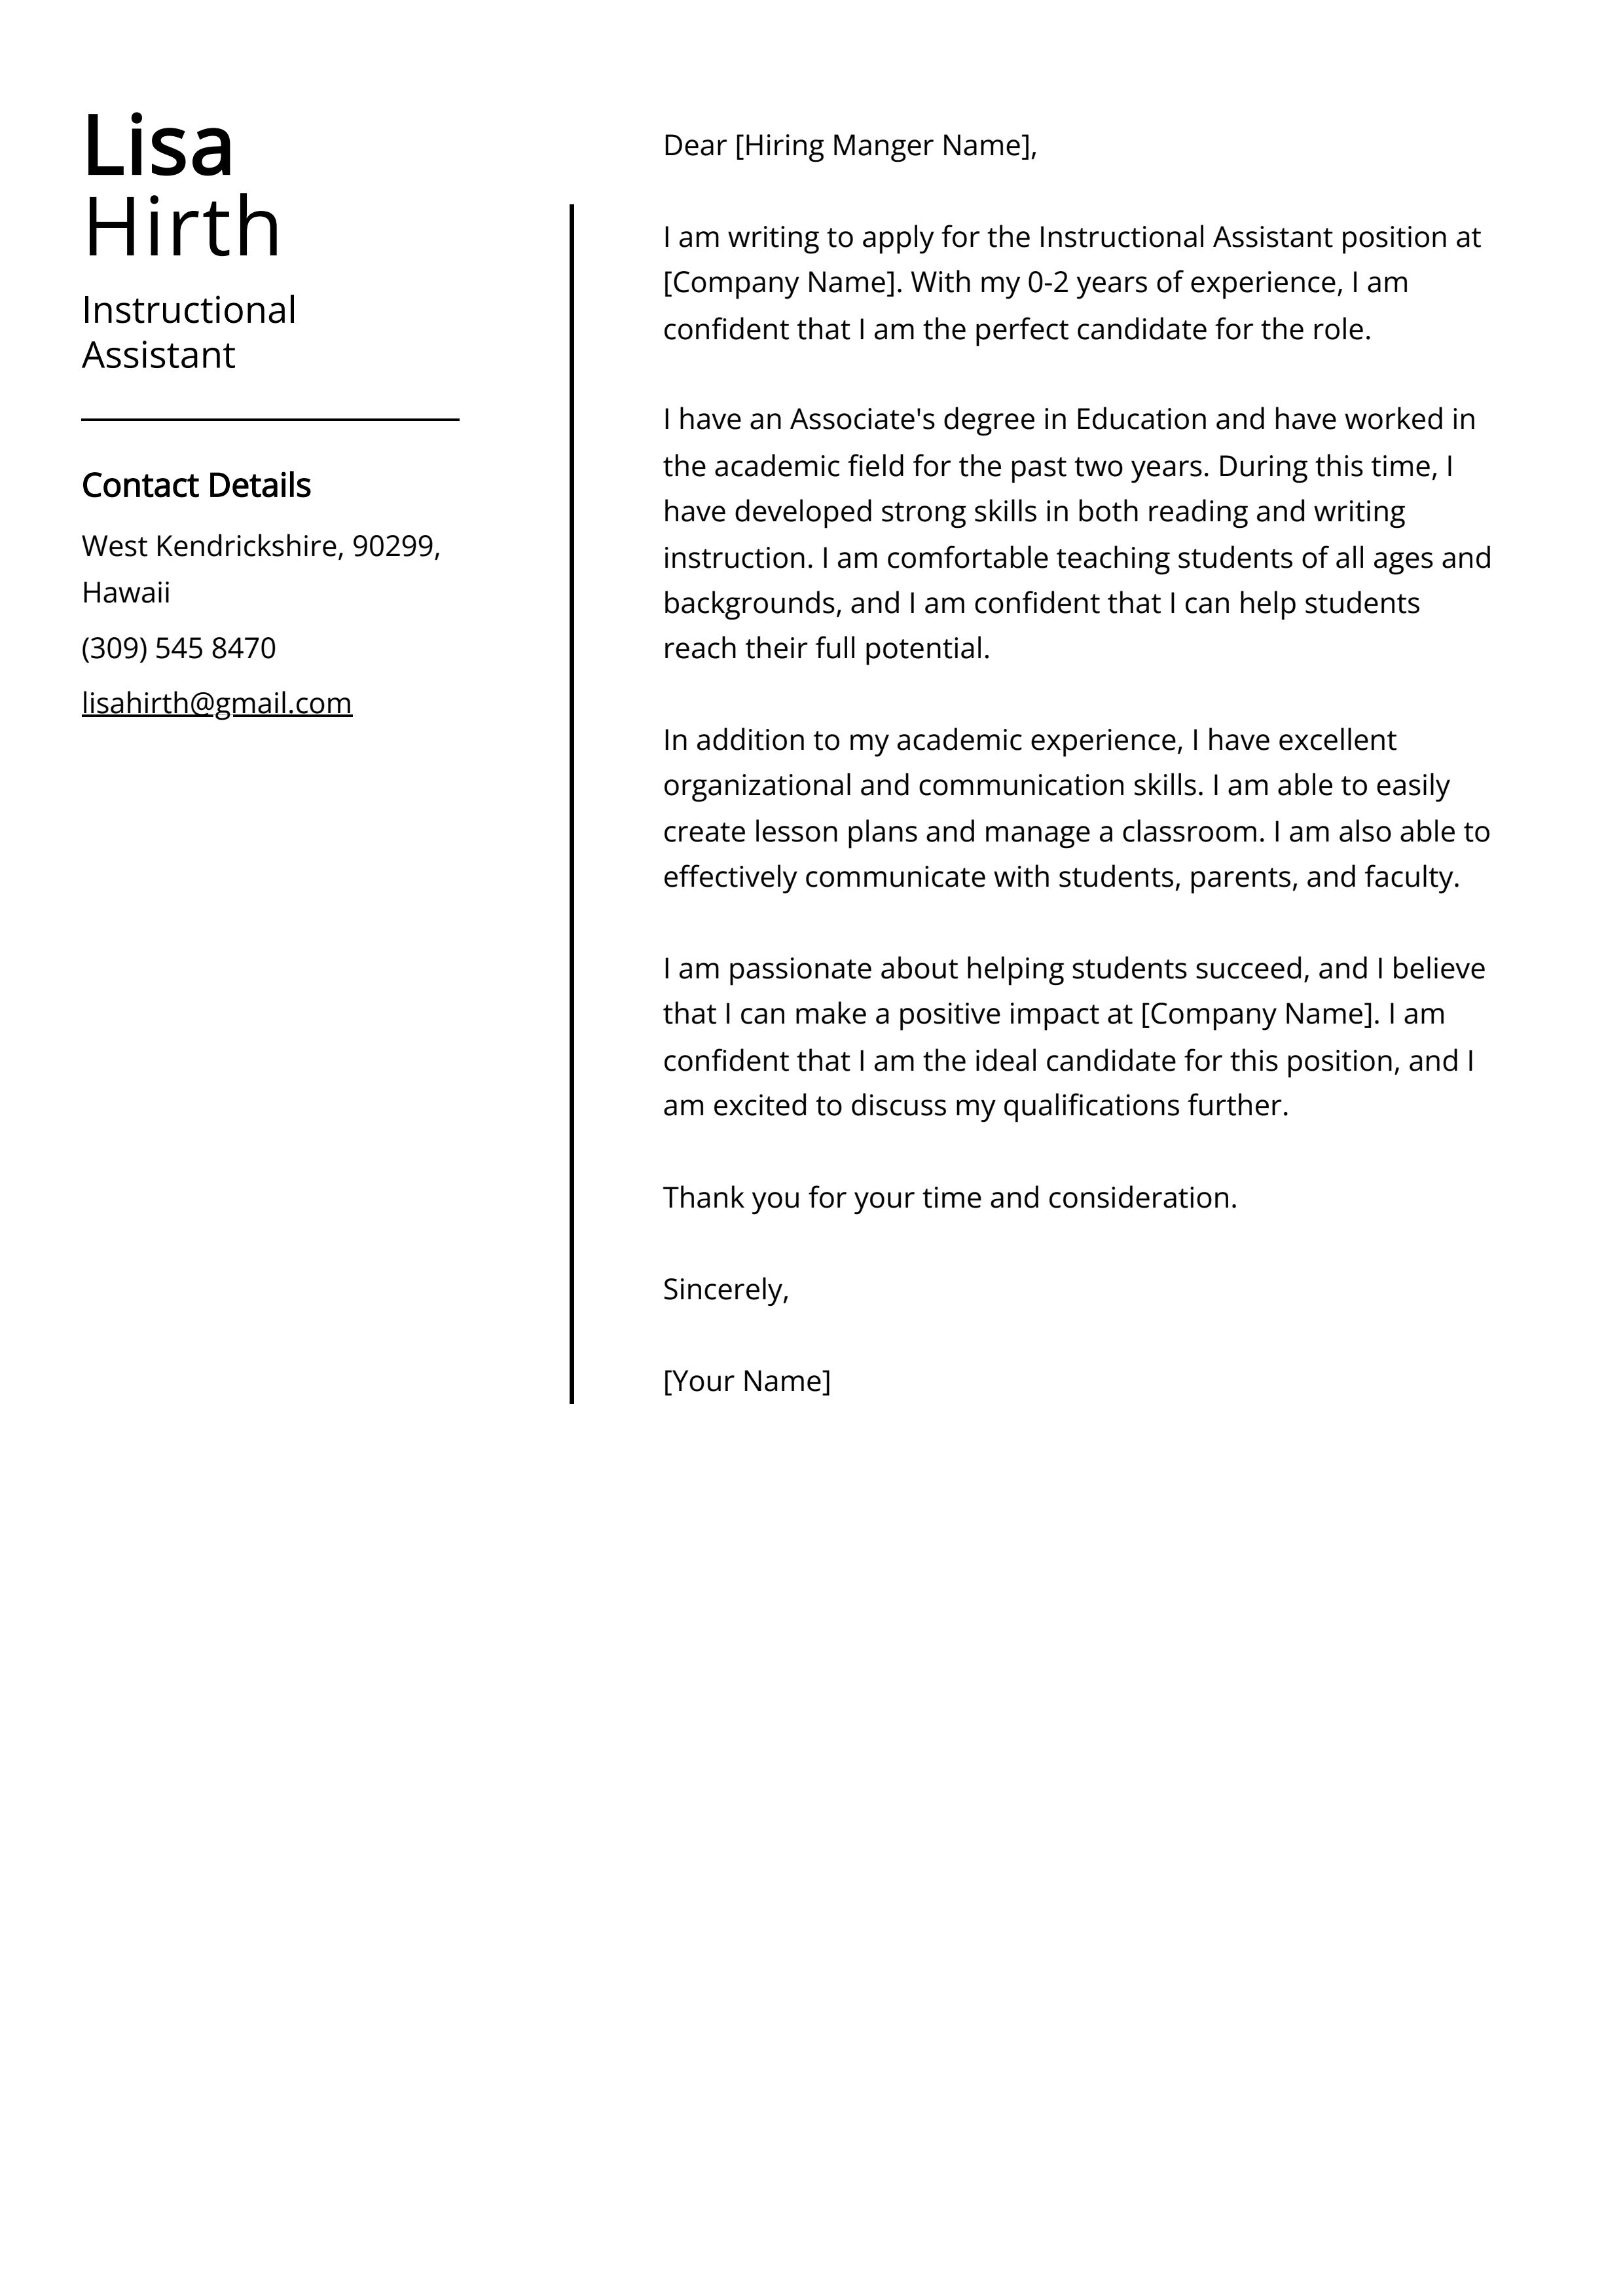 Instructional Assistant Cover Letter Example